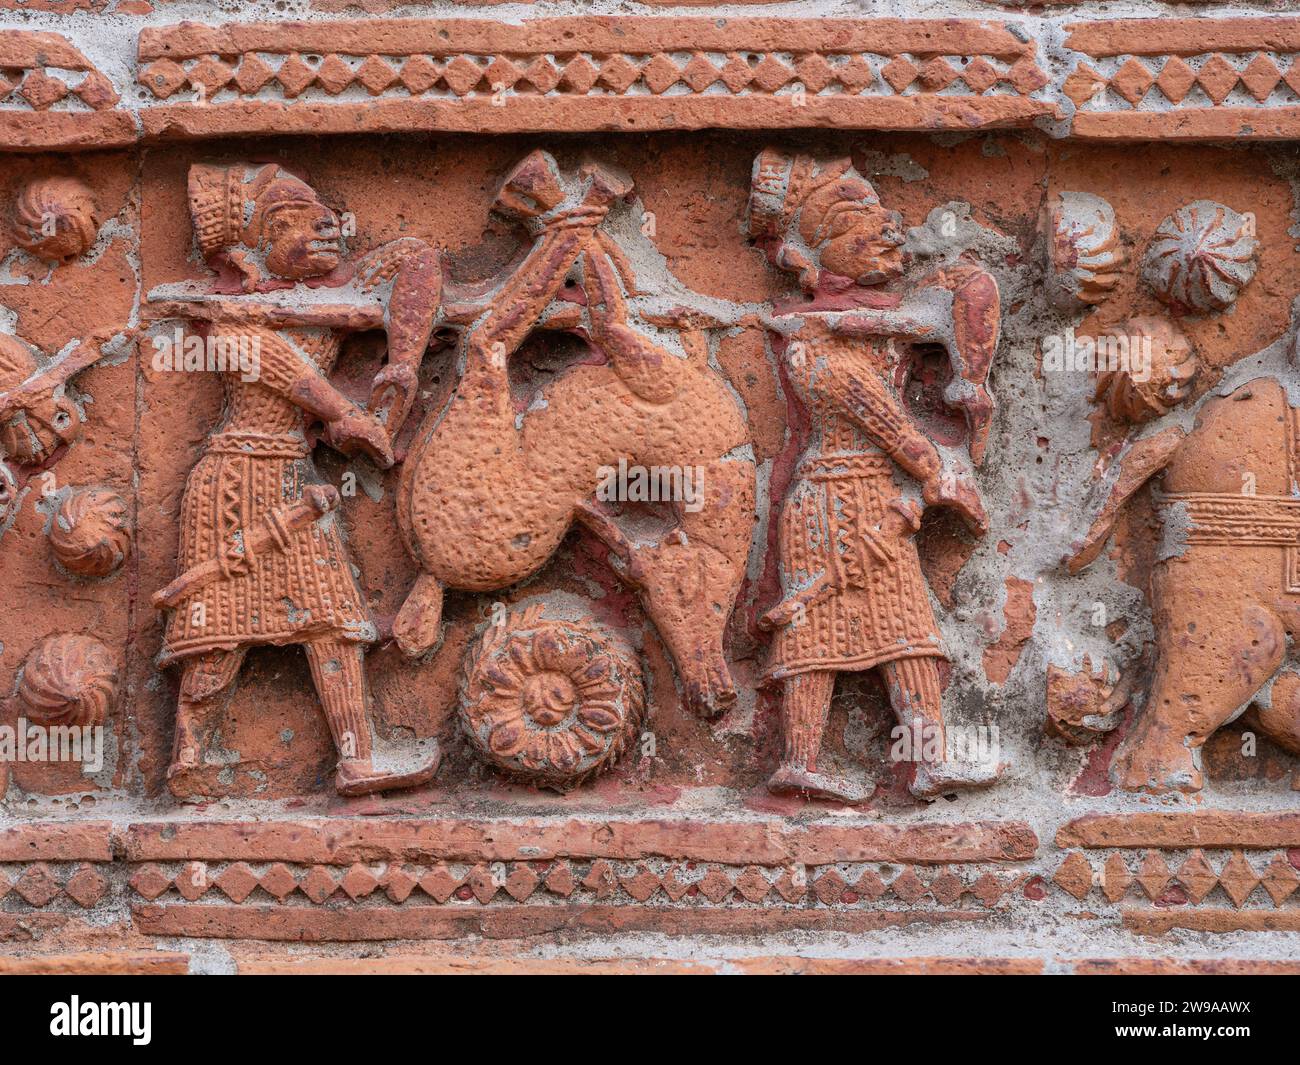 Closeup view of carved terracotta hunting scene of hunters carrying deer on ancient Govinda temple in Puthia religious complex, Rajshahi, Bangladesh Stock Photo